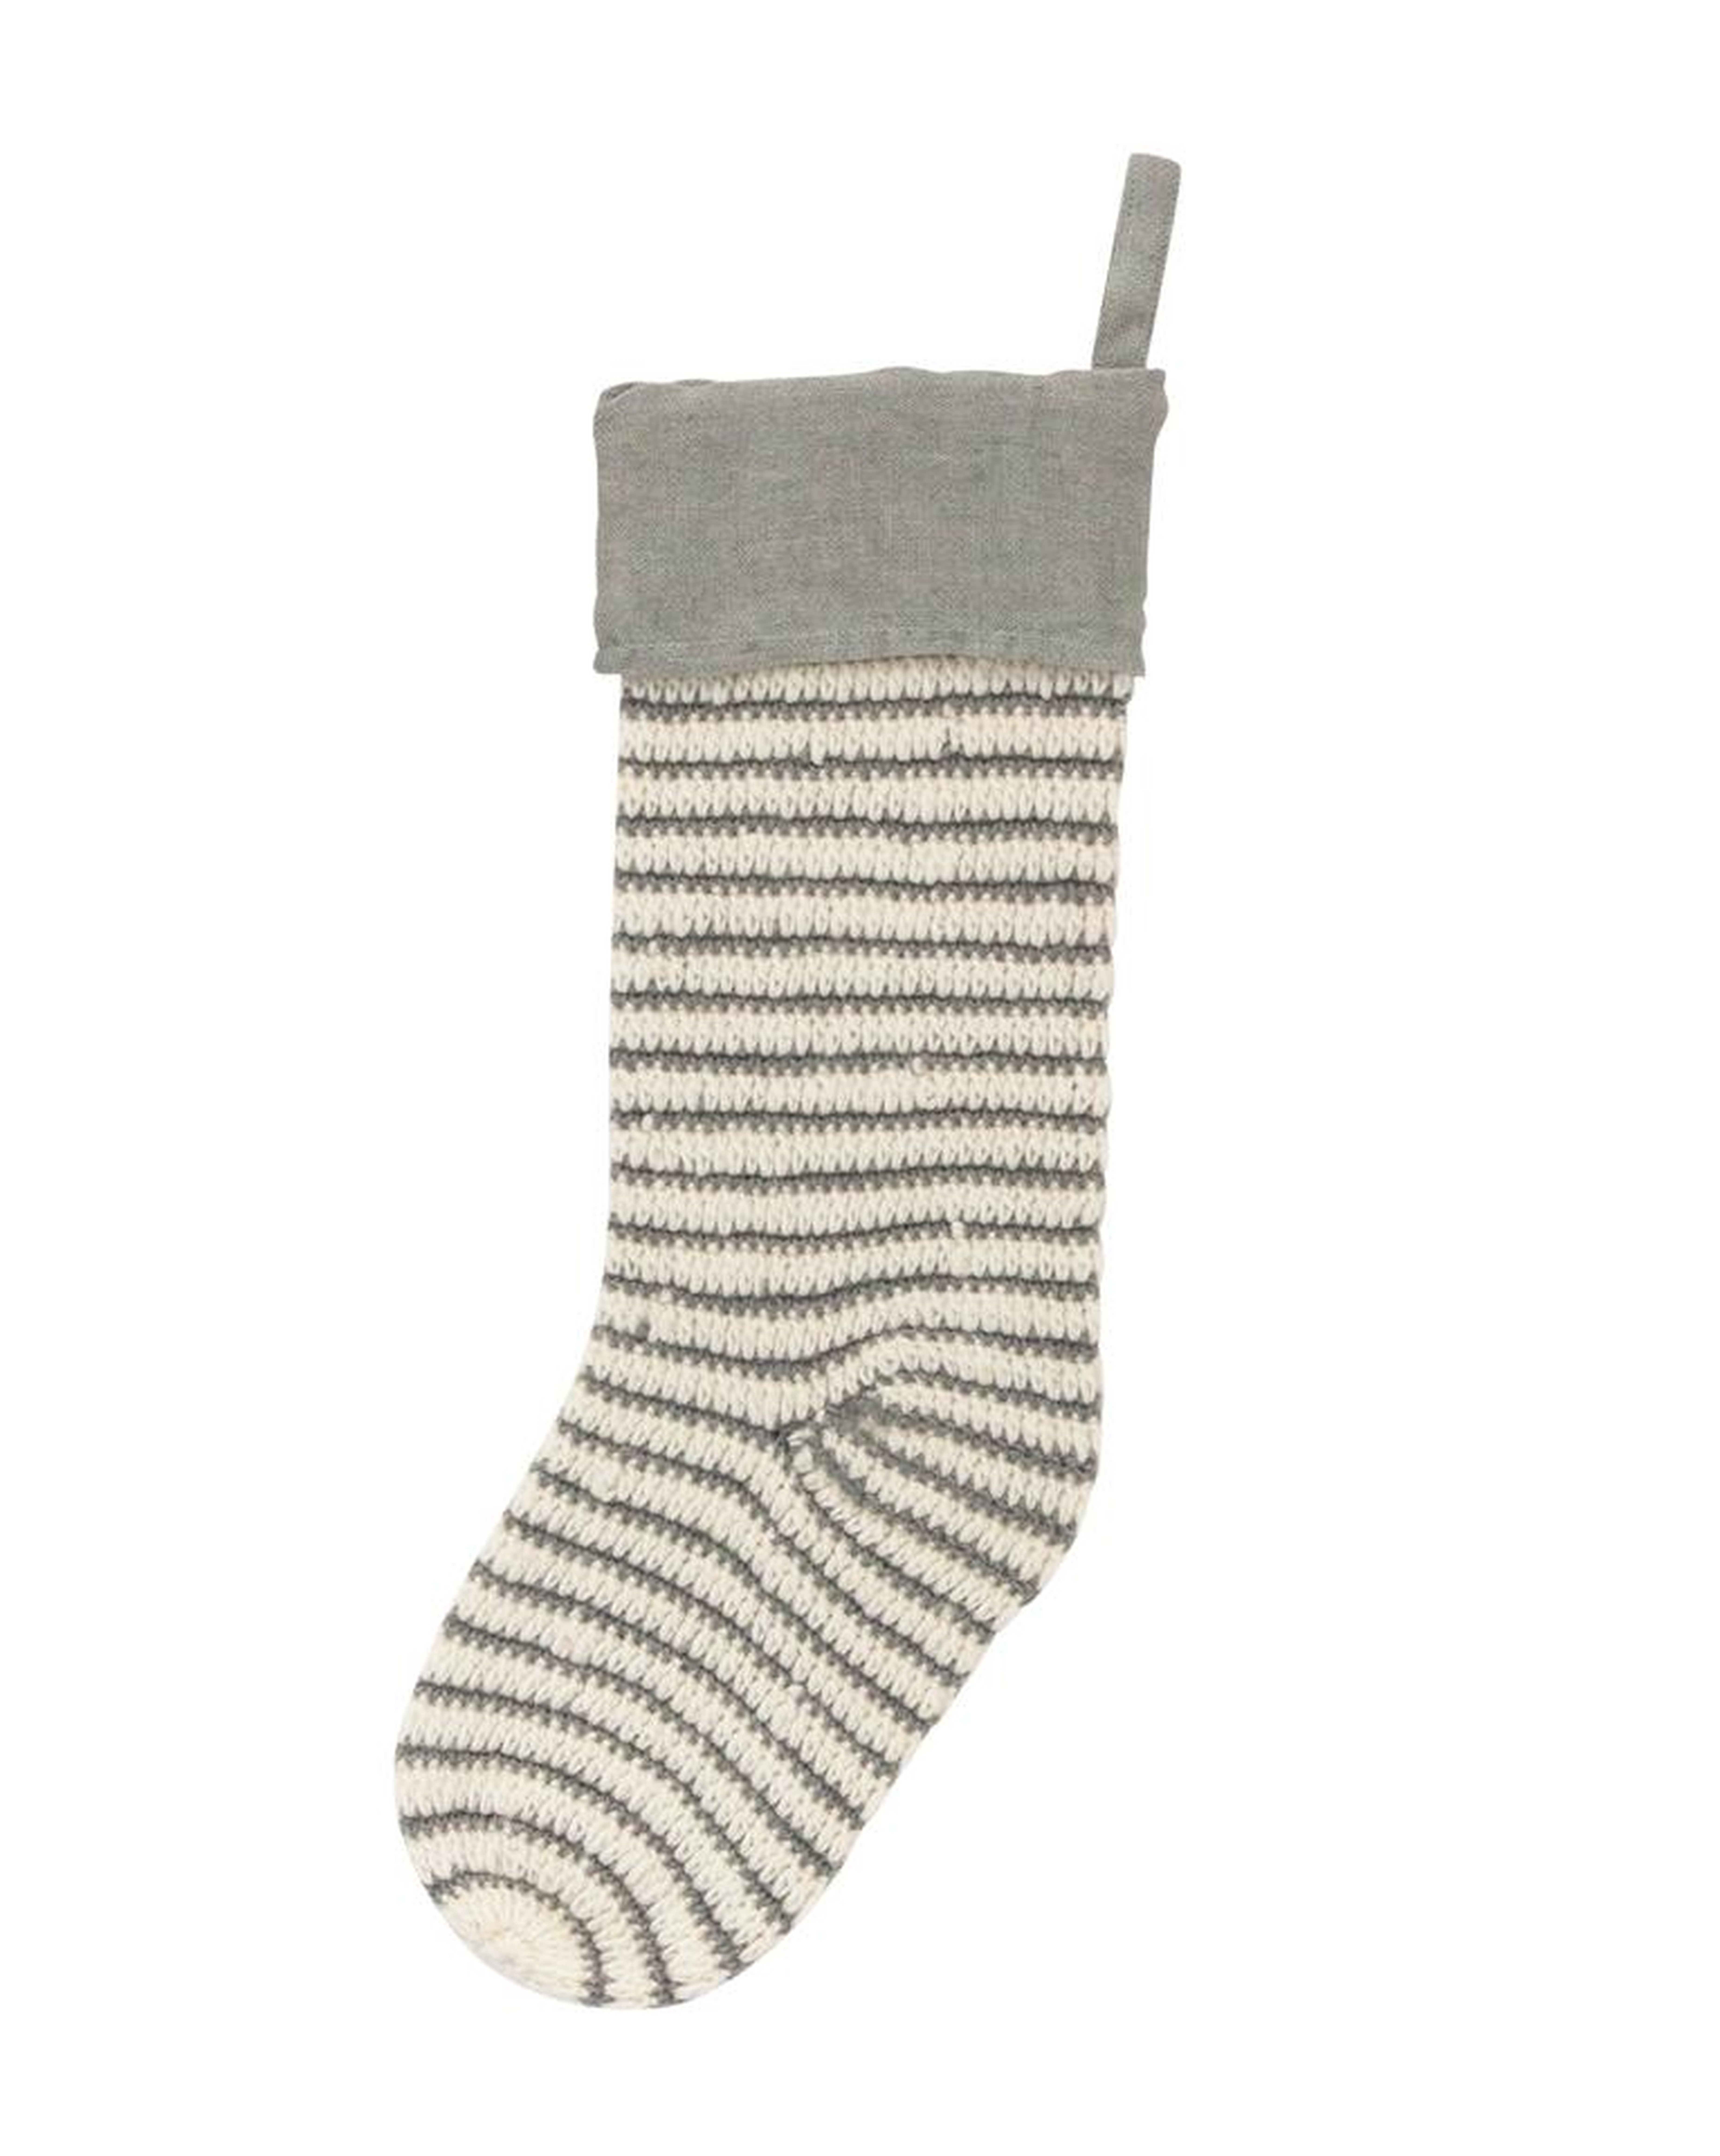 STRIPED KNIT STOCKING - McGee & Co.